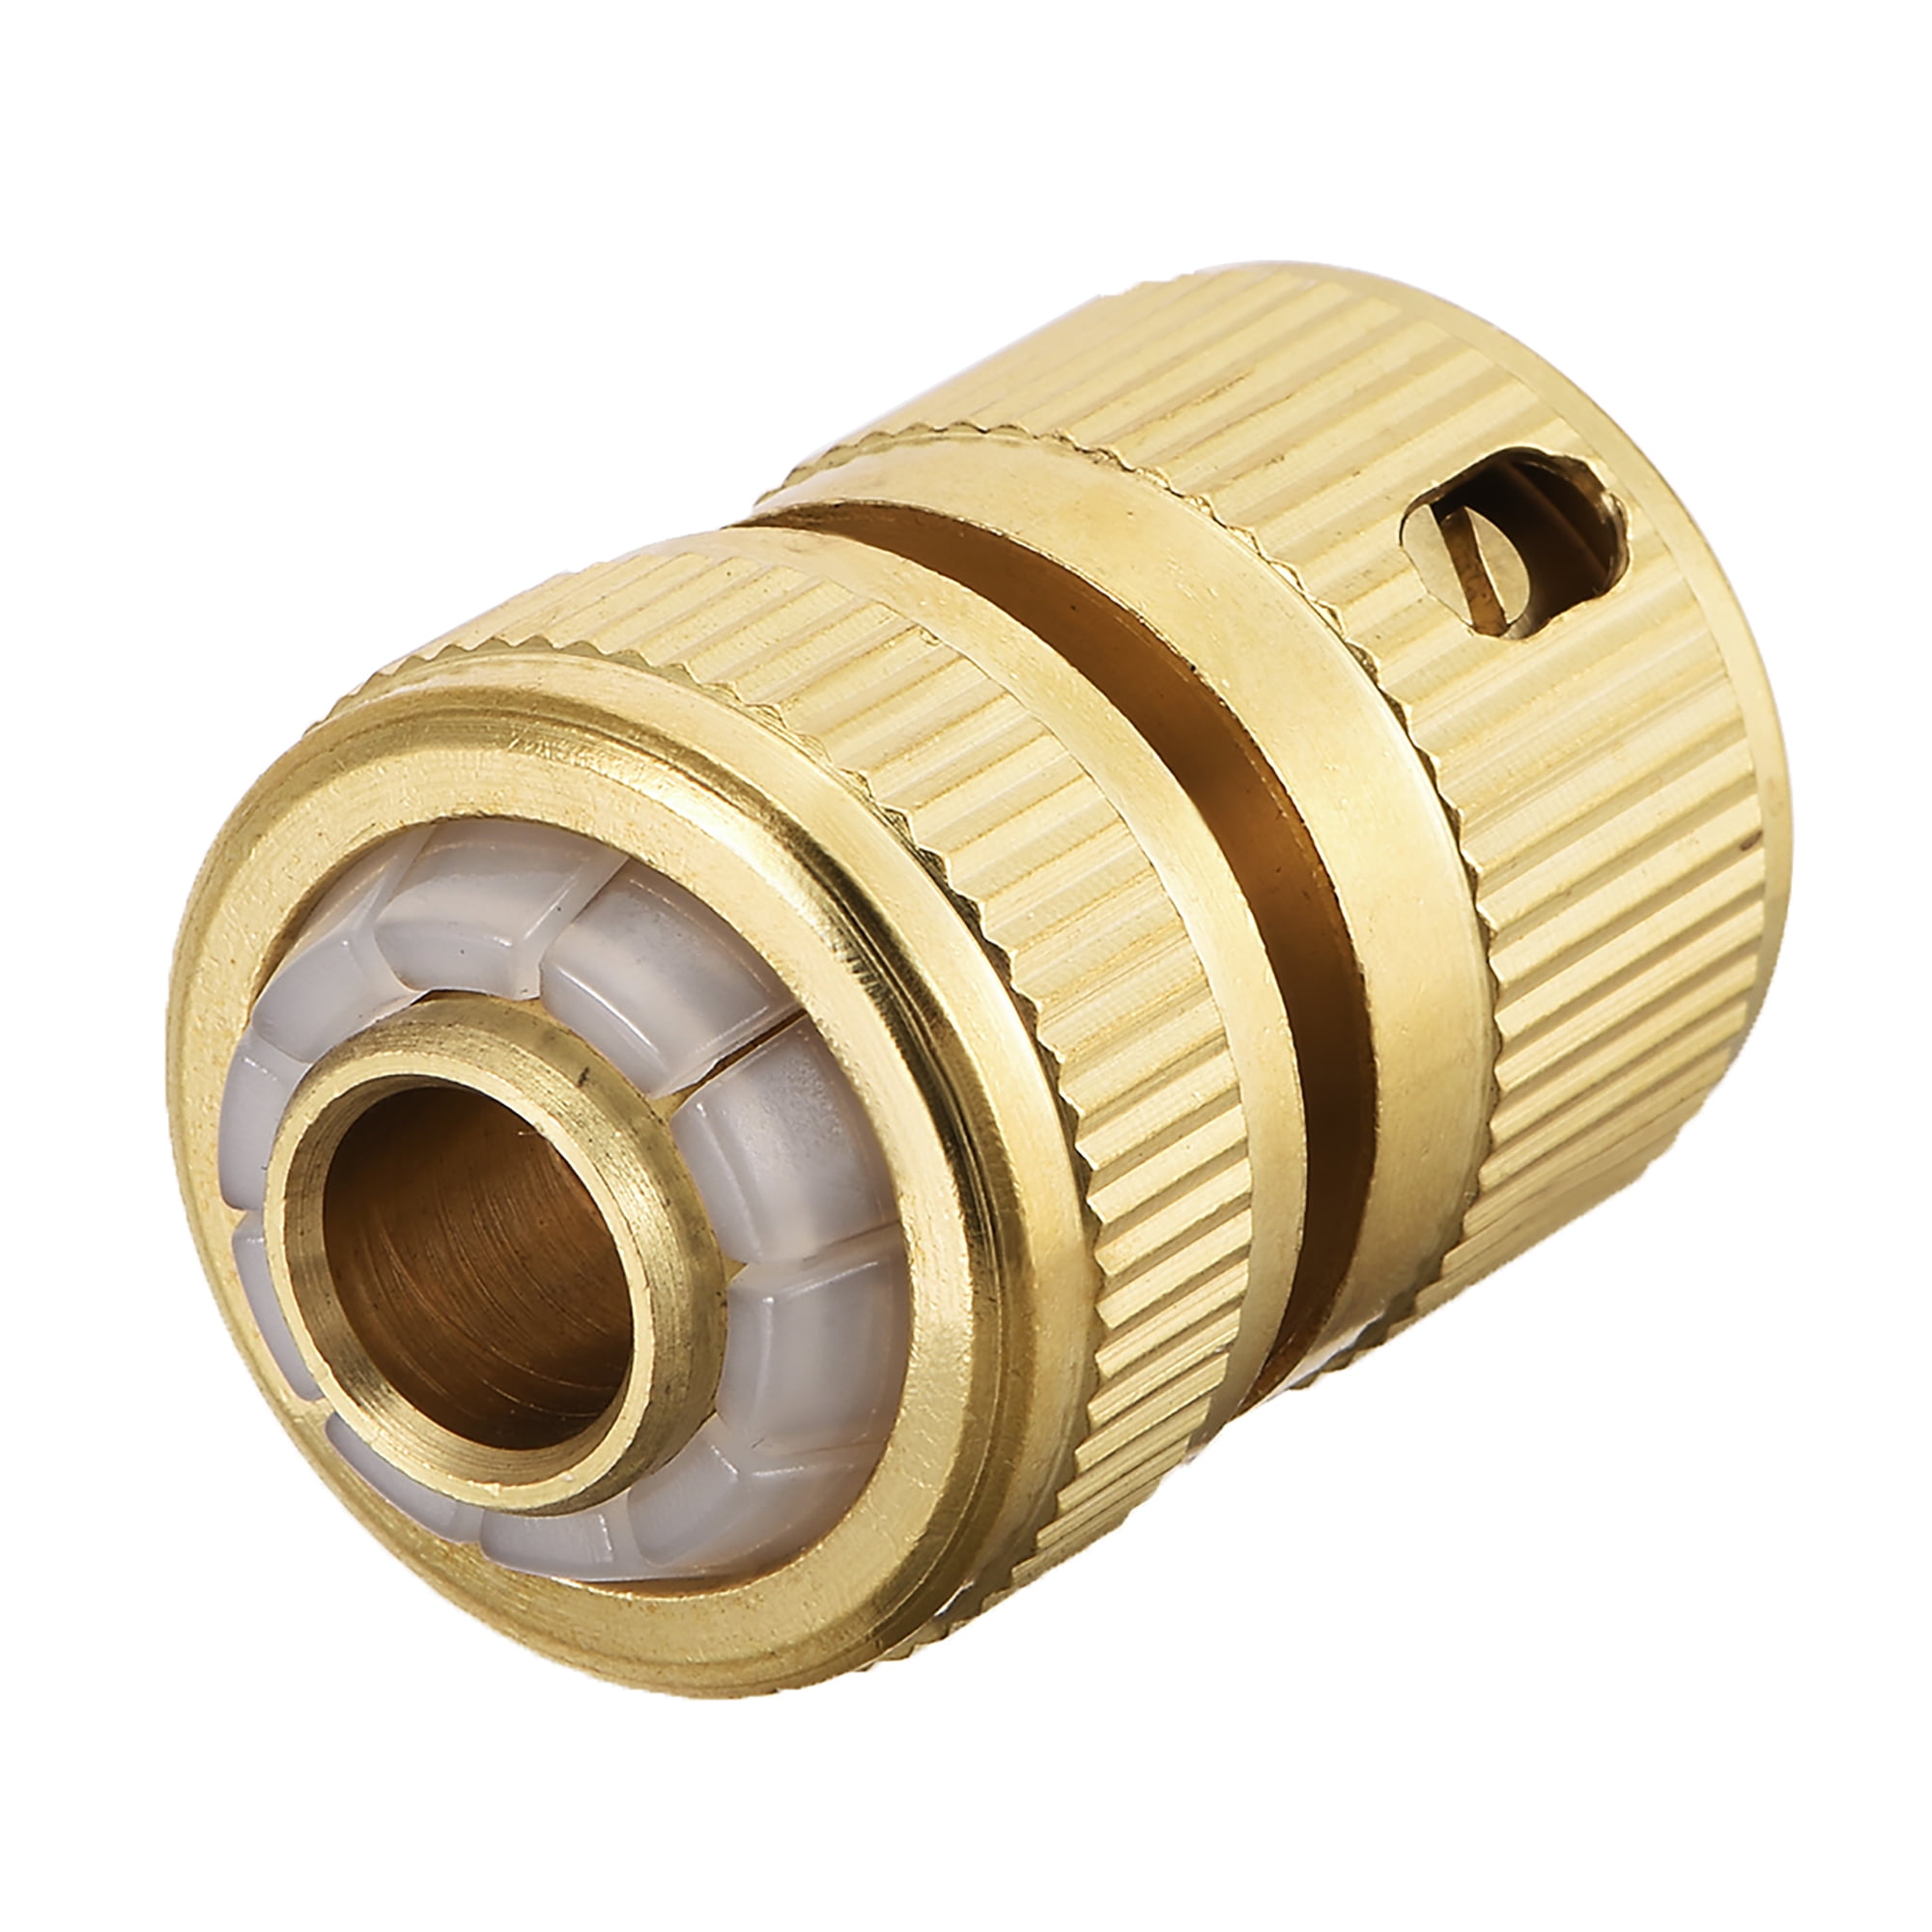 Details about   Brass-Coated 1/2 Inch Quick Release Garden Hose Connector Fittings Adapters 